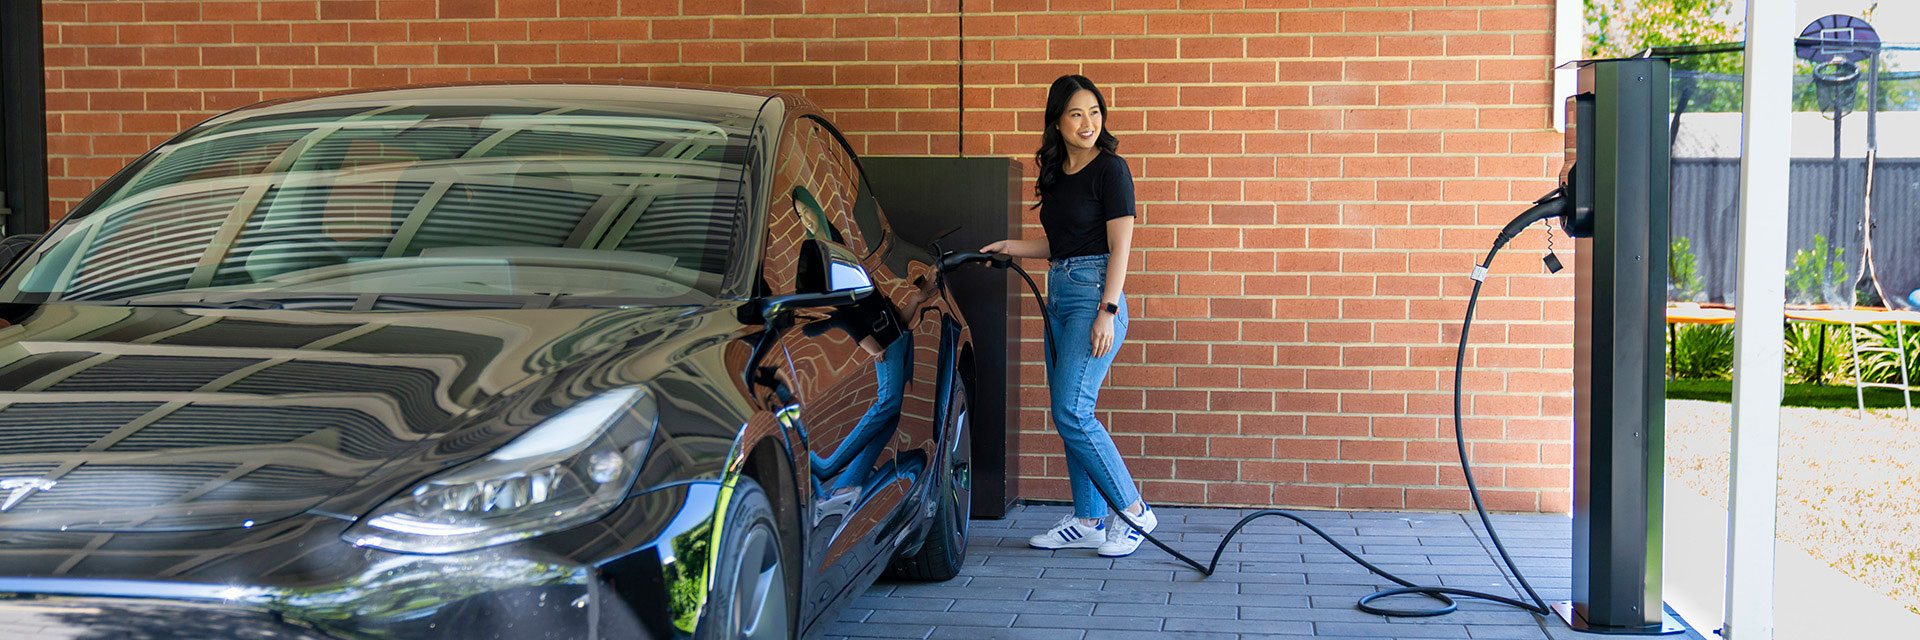 Charging an EV with a home EV charger